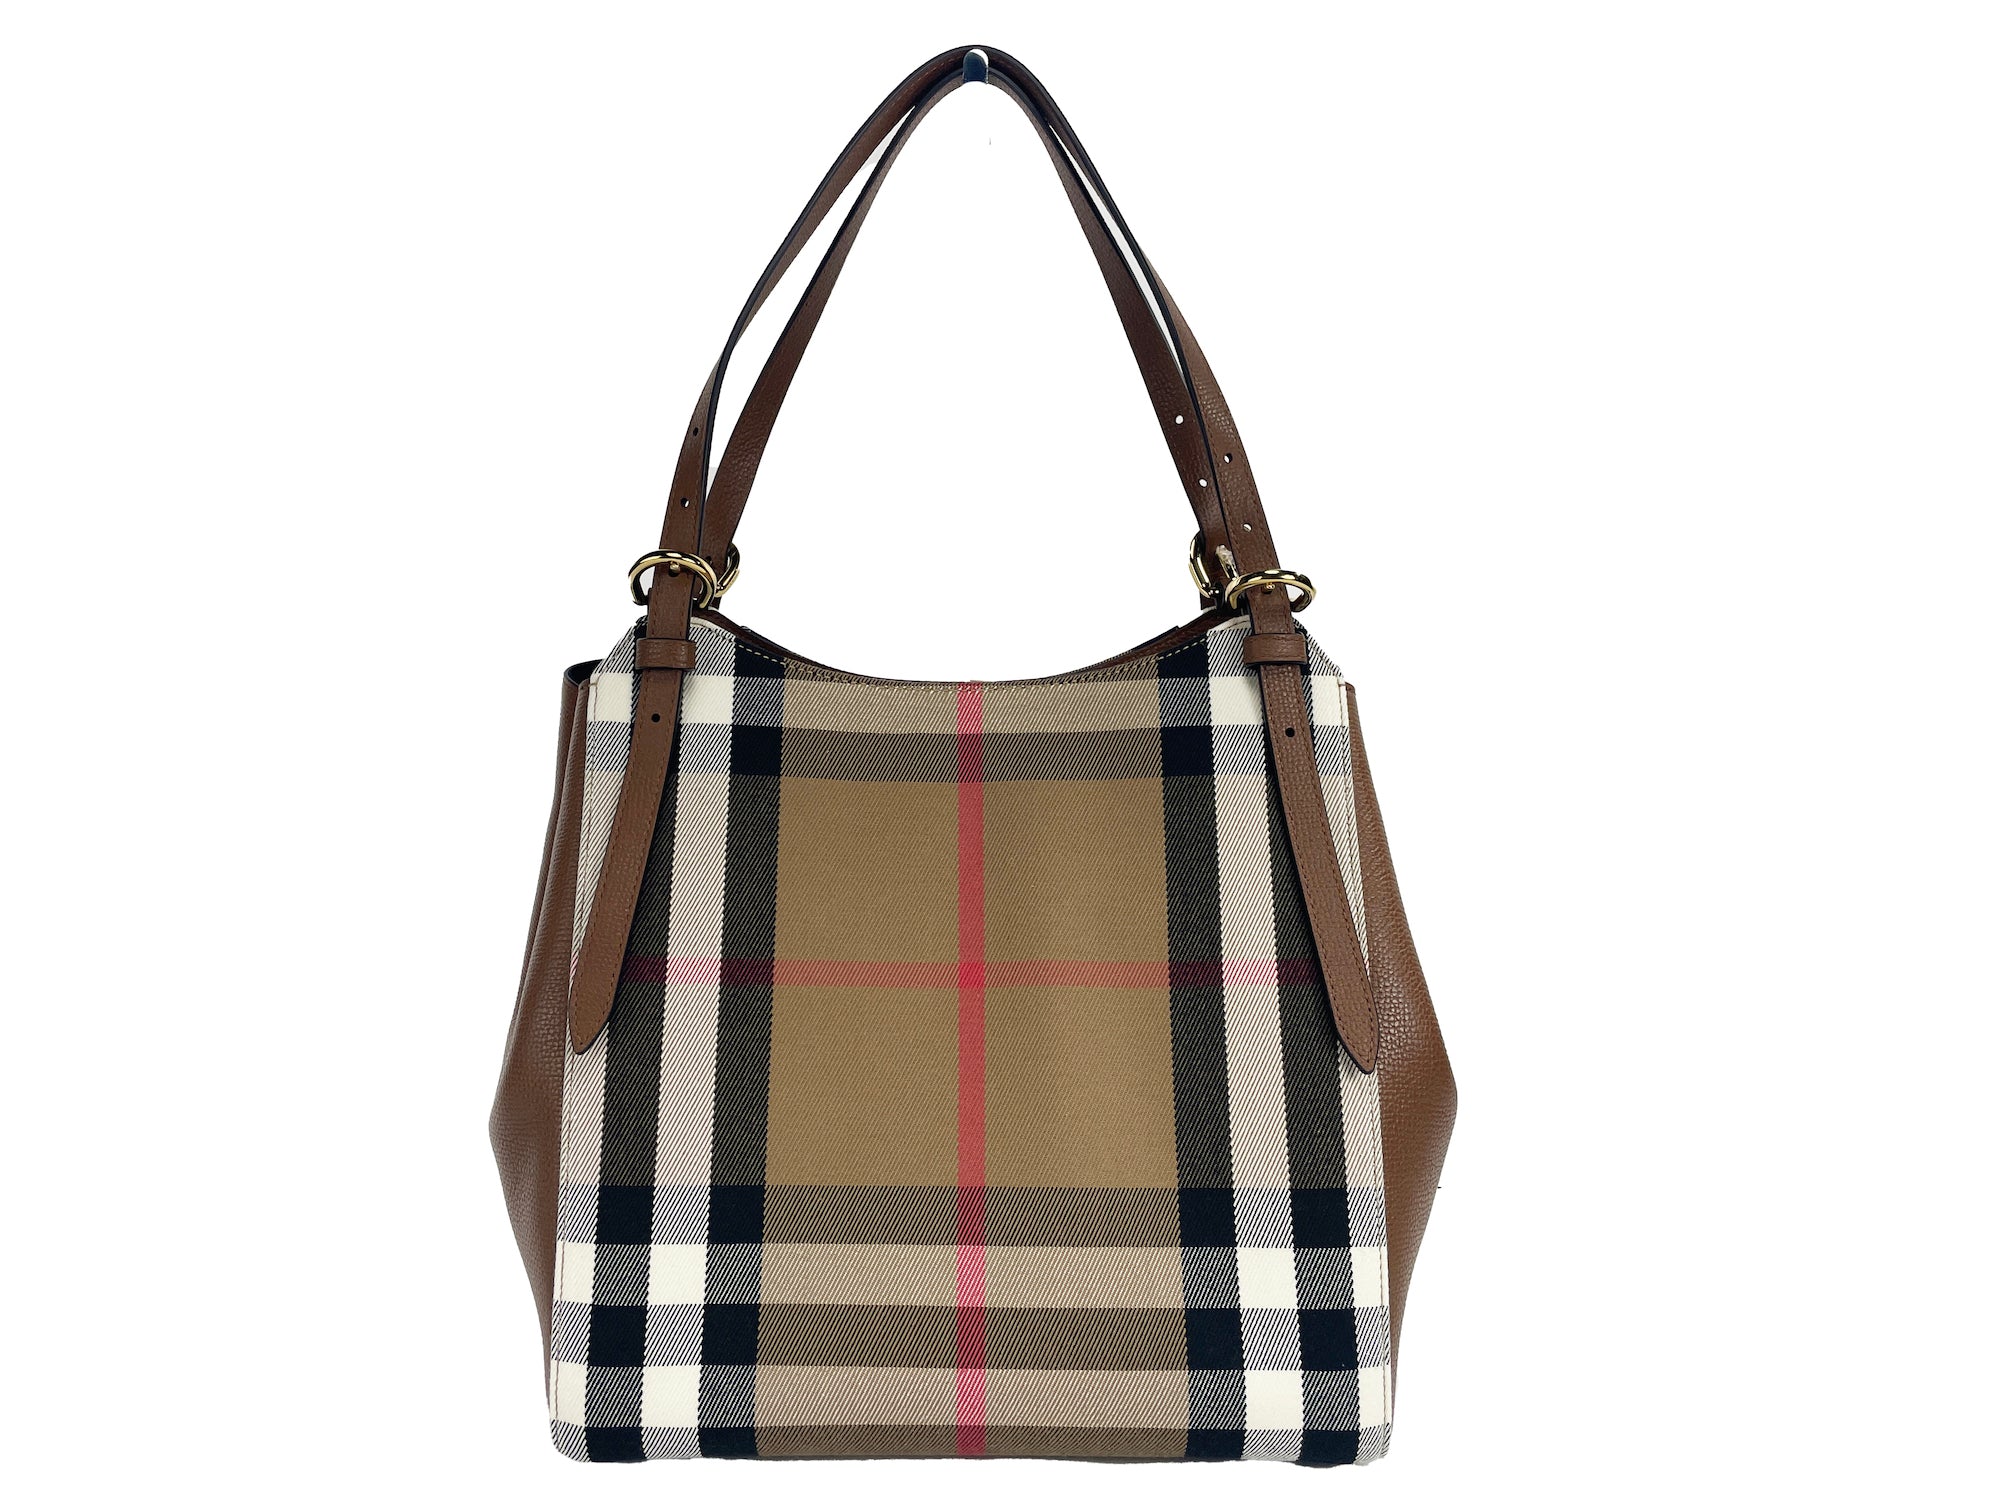 Small Canterby Tan Leather Check Canvas Tote Bag Purse - Divitiae Glamour